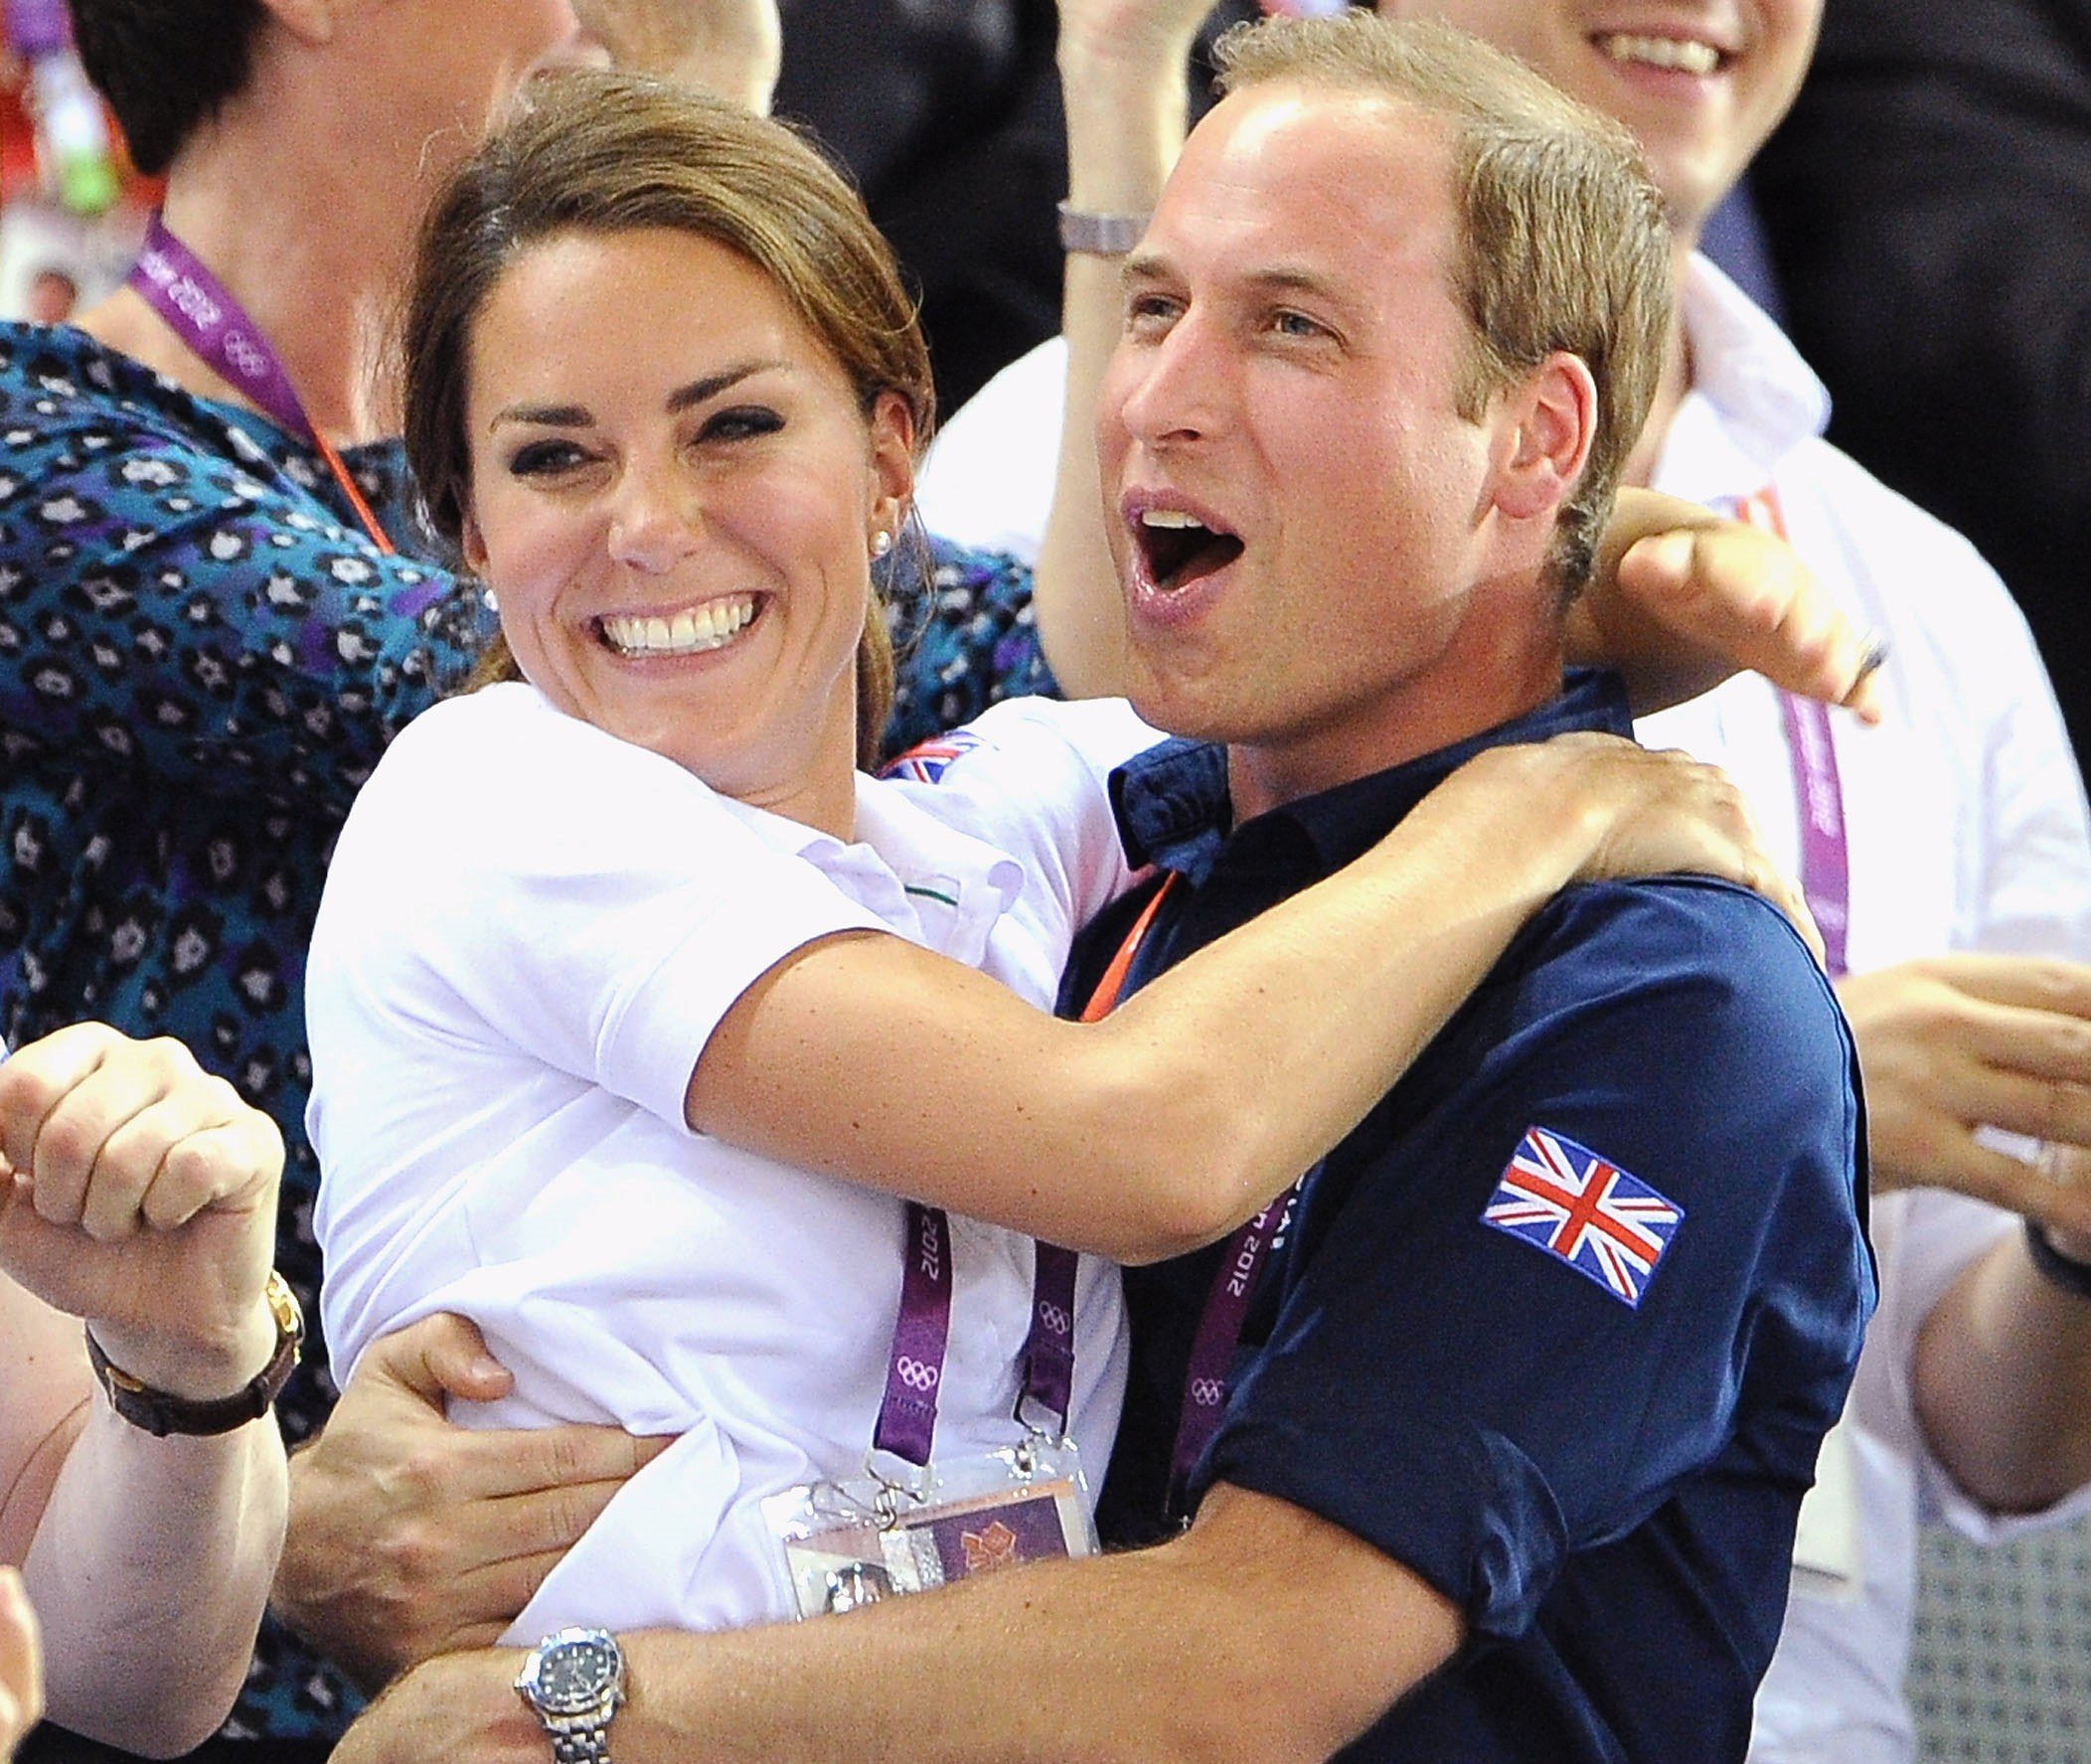 Prince William and Kate Middleton cheering and hugging during Day 6 of the London 2012 Olympic Games